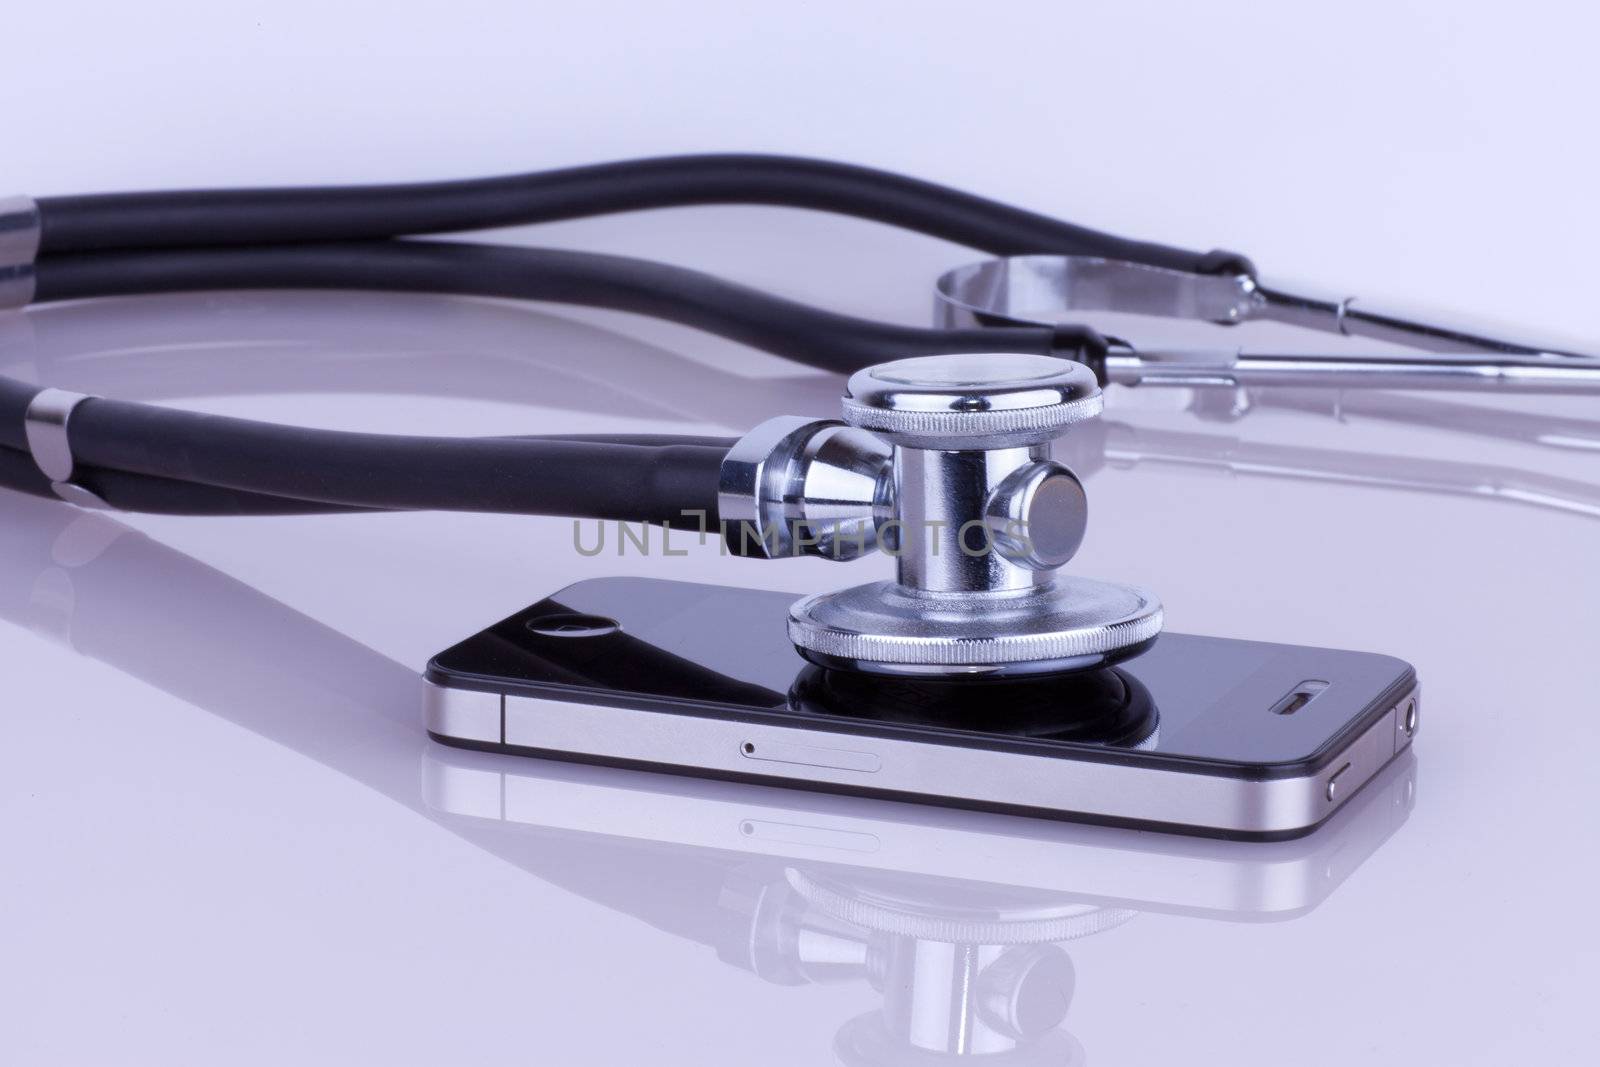 Stethoscope lying on the phone. Cell phone service